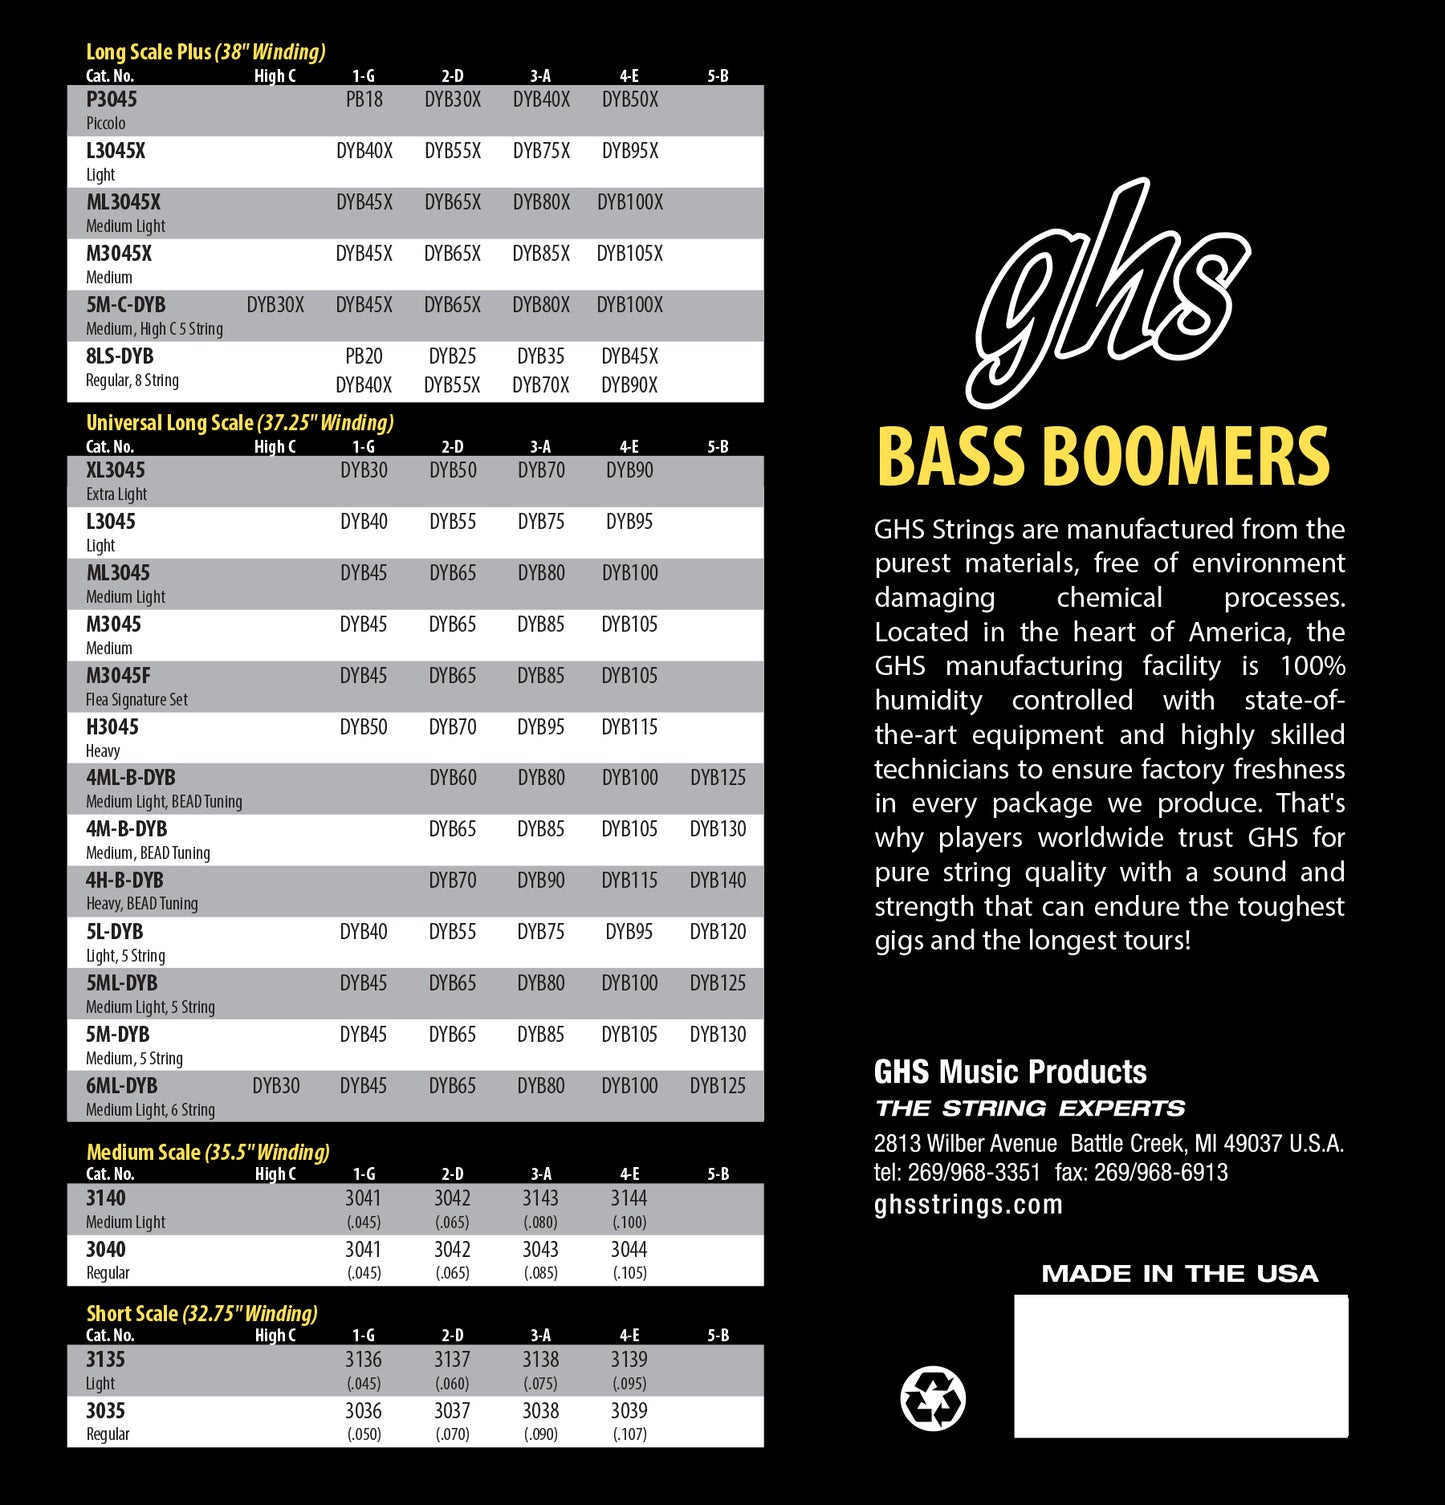 GHS Bass Boomers XL3045, 4-String 30-90